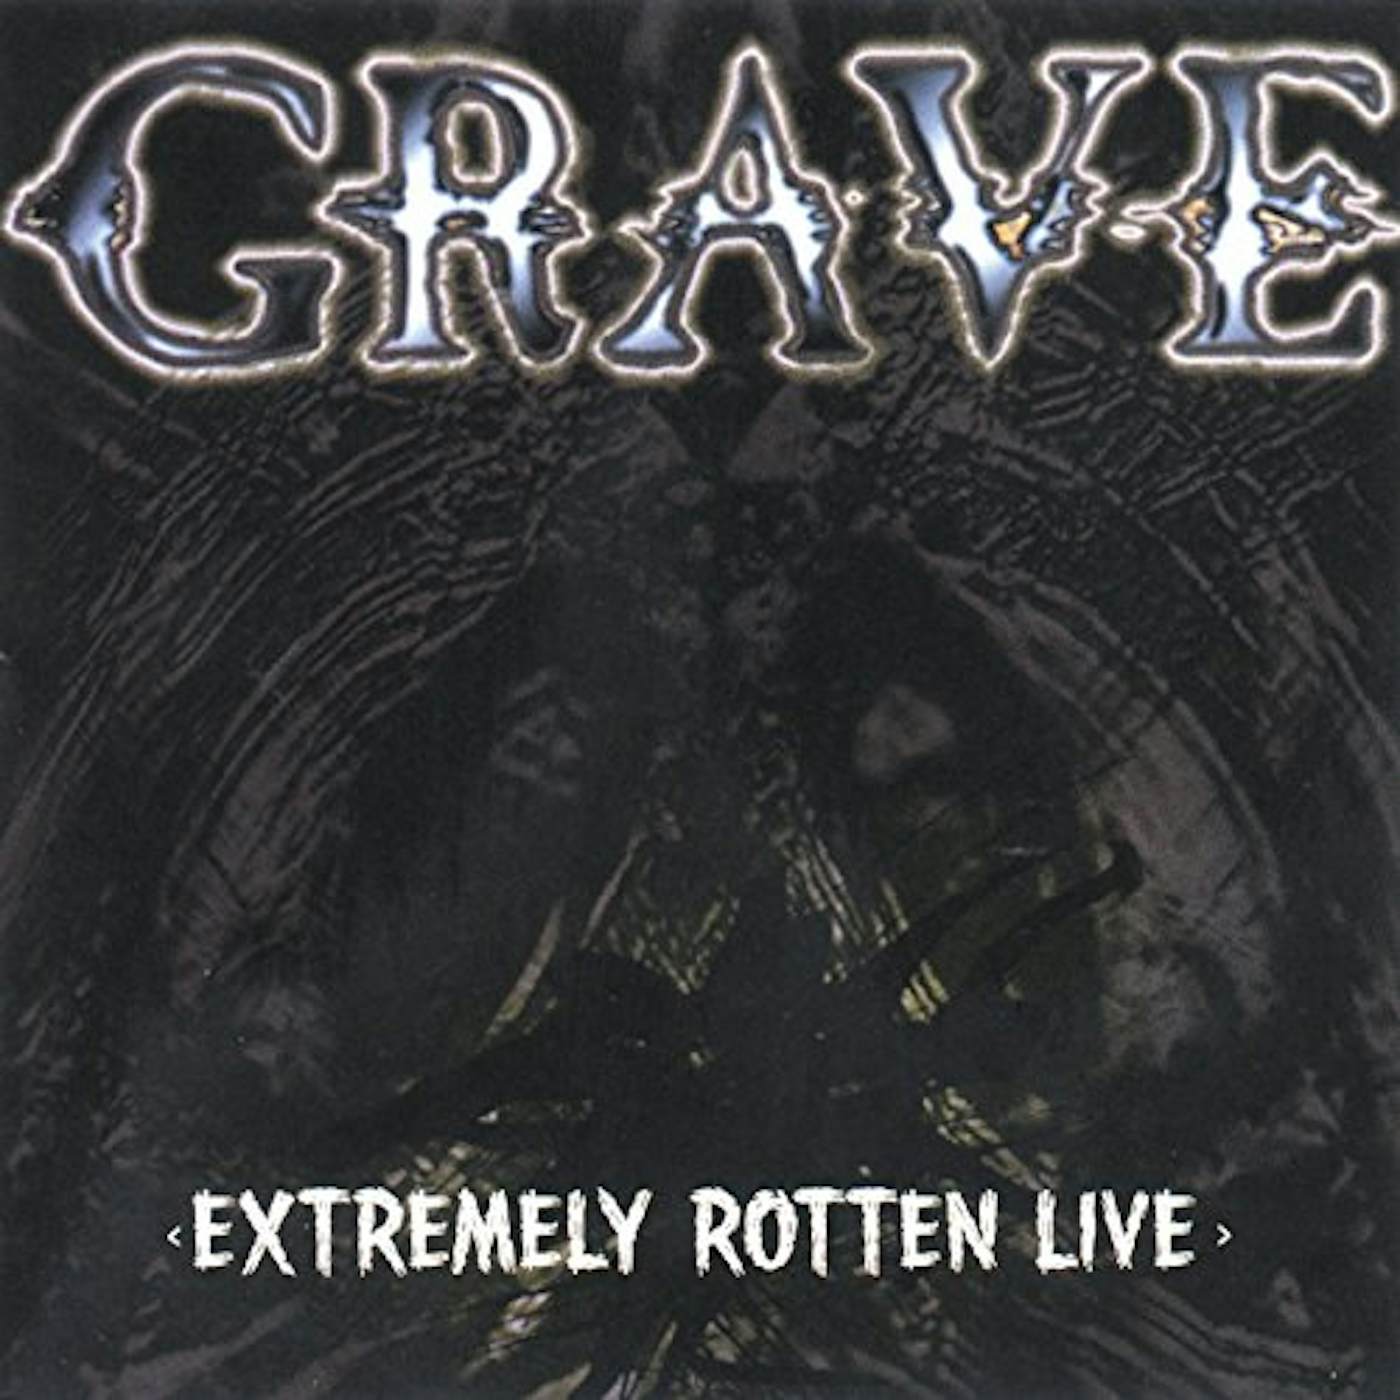 Grave EXTREMELY ROTTEN LIVE CD